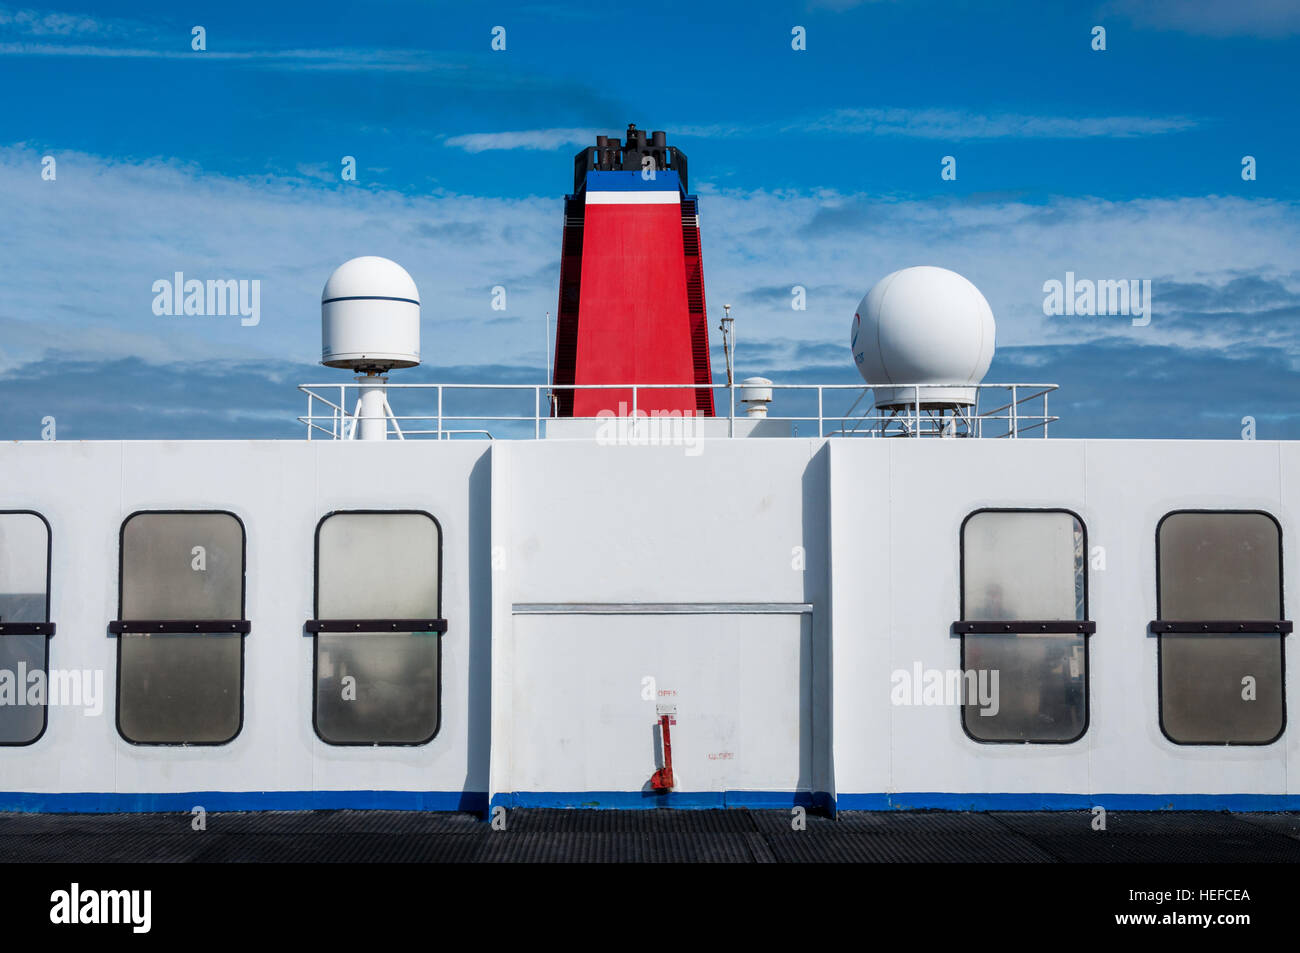 Stena Line red ferry funnel and deck details against blue skies. Stock Photo